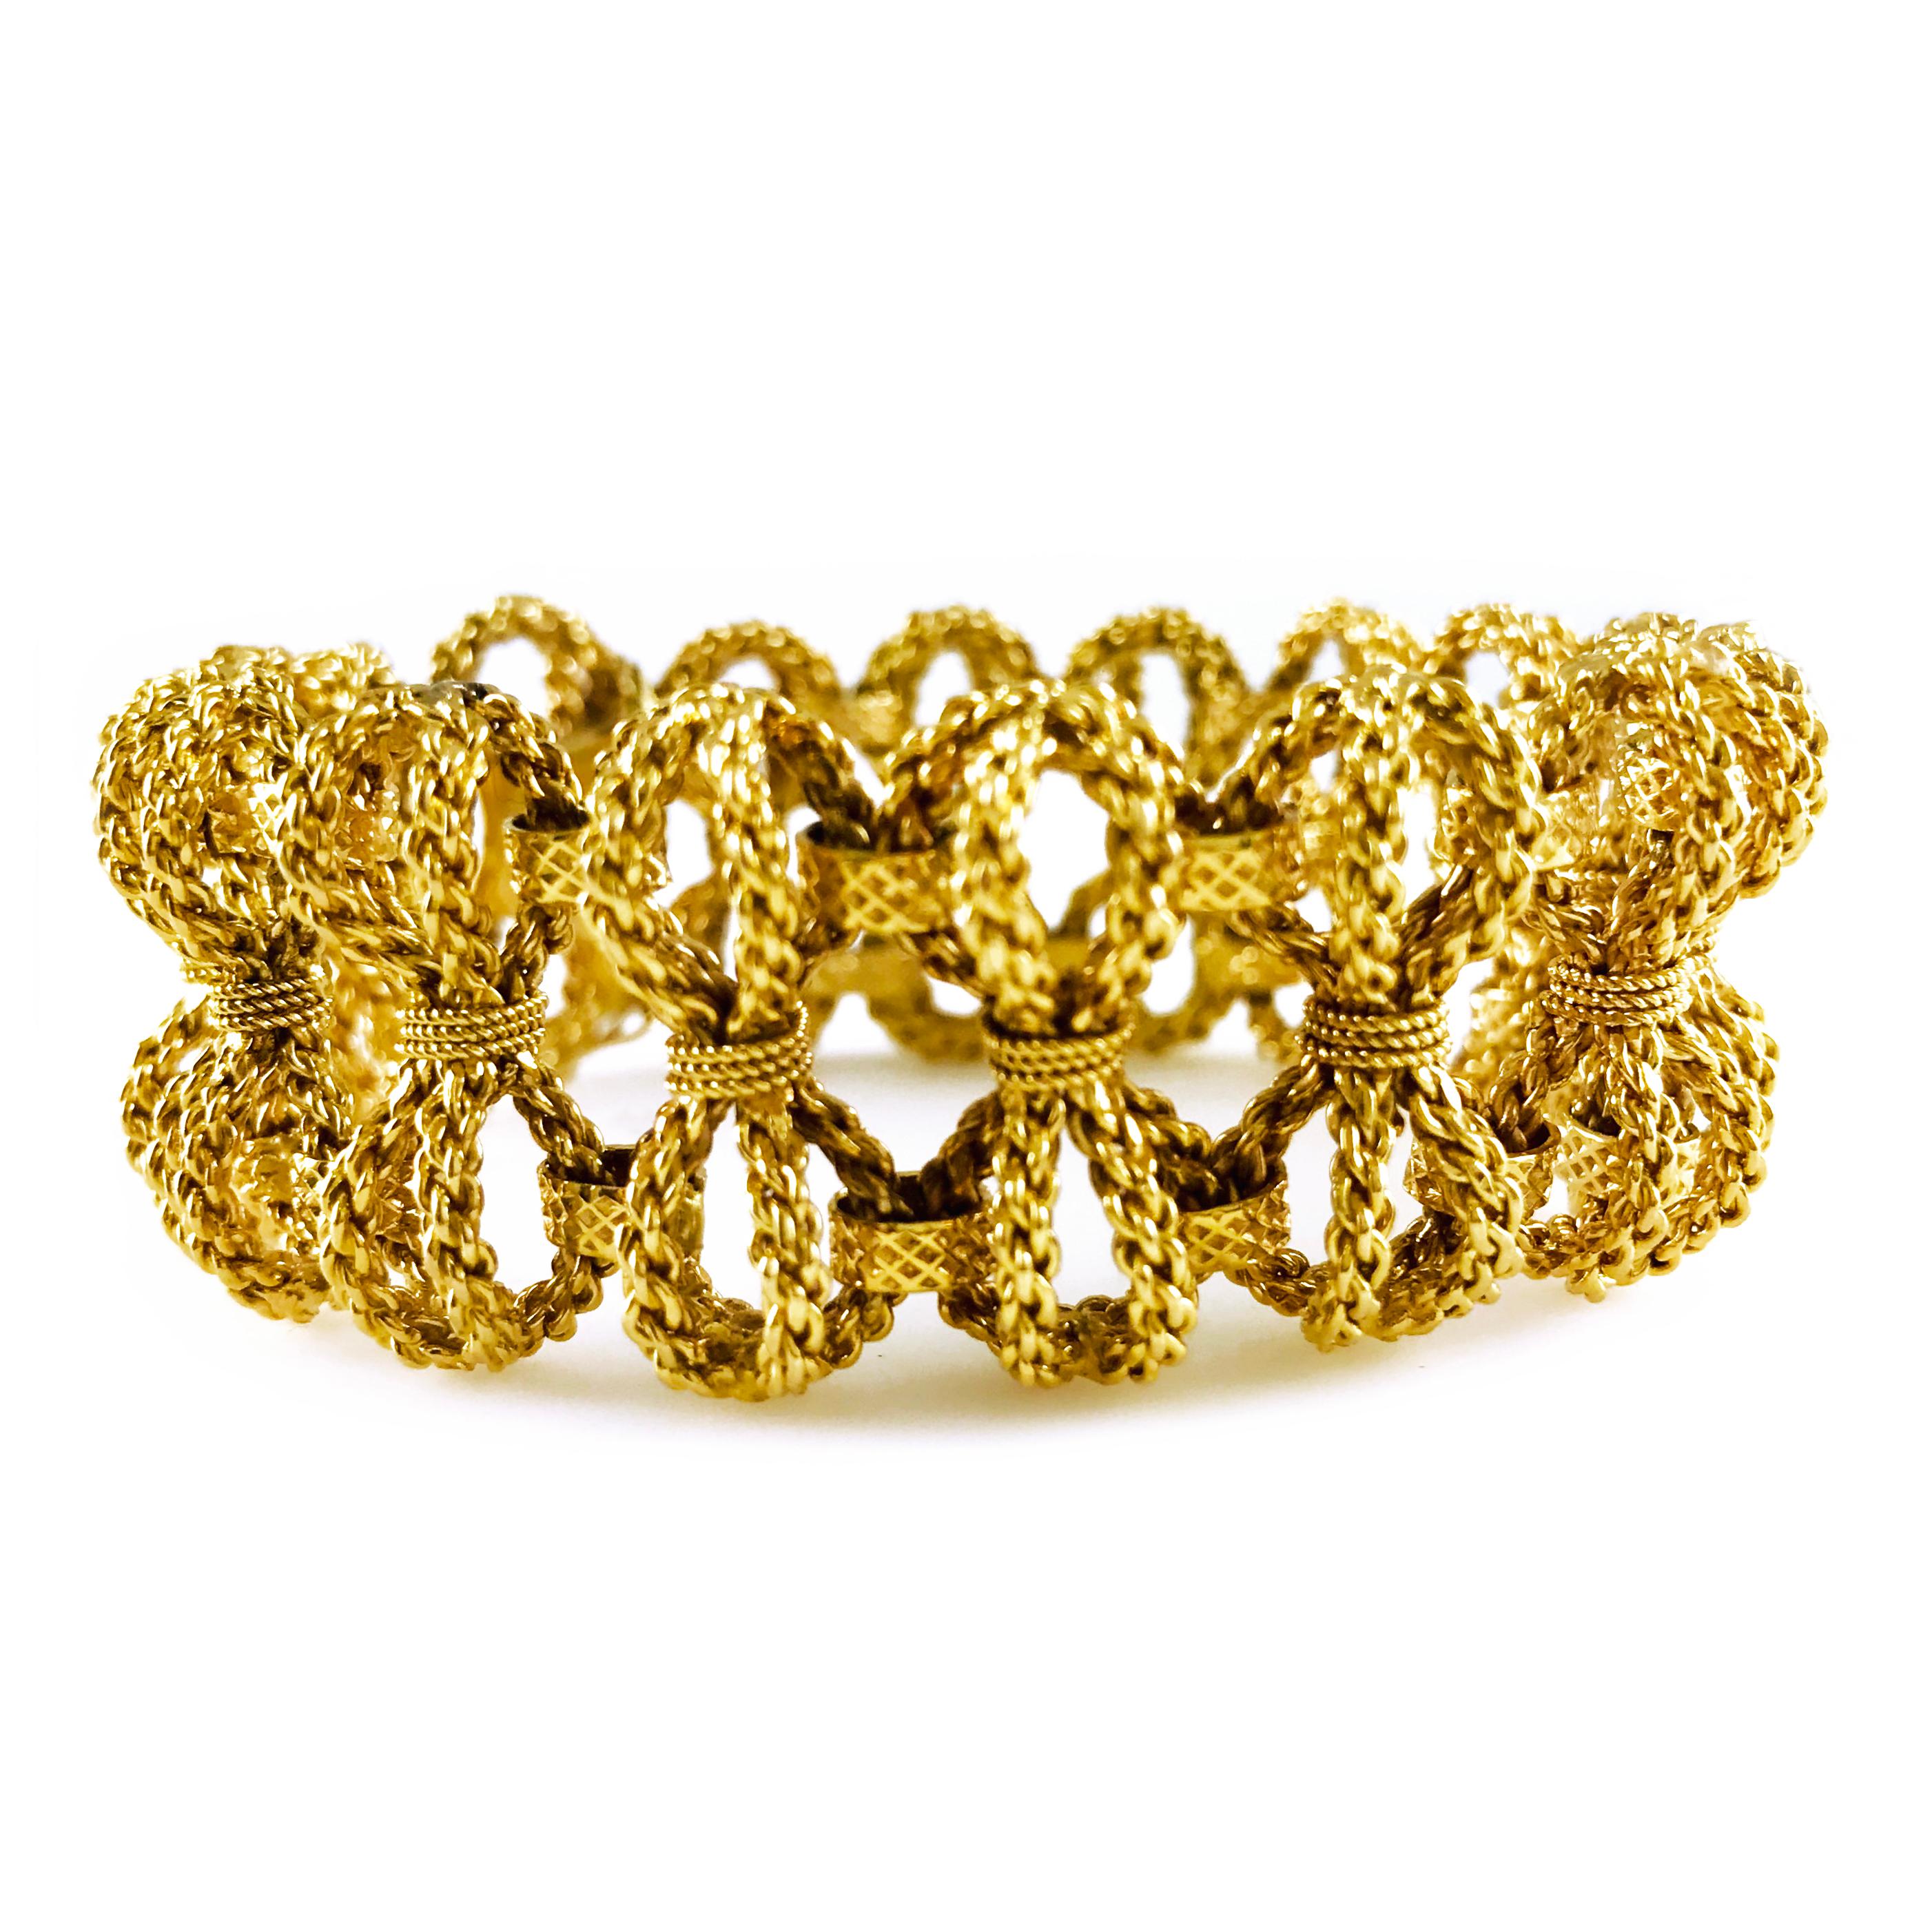 18K Gold Rope-Style Bow Bracelet. Sweet, romantic bows are formed all along this gorgeous bracelet. Pretty, yet bold, a unique treat that can be worn casually or for a dressy occasion. The bracelet is 7 inches long and 24mm wide.